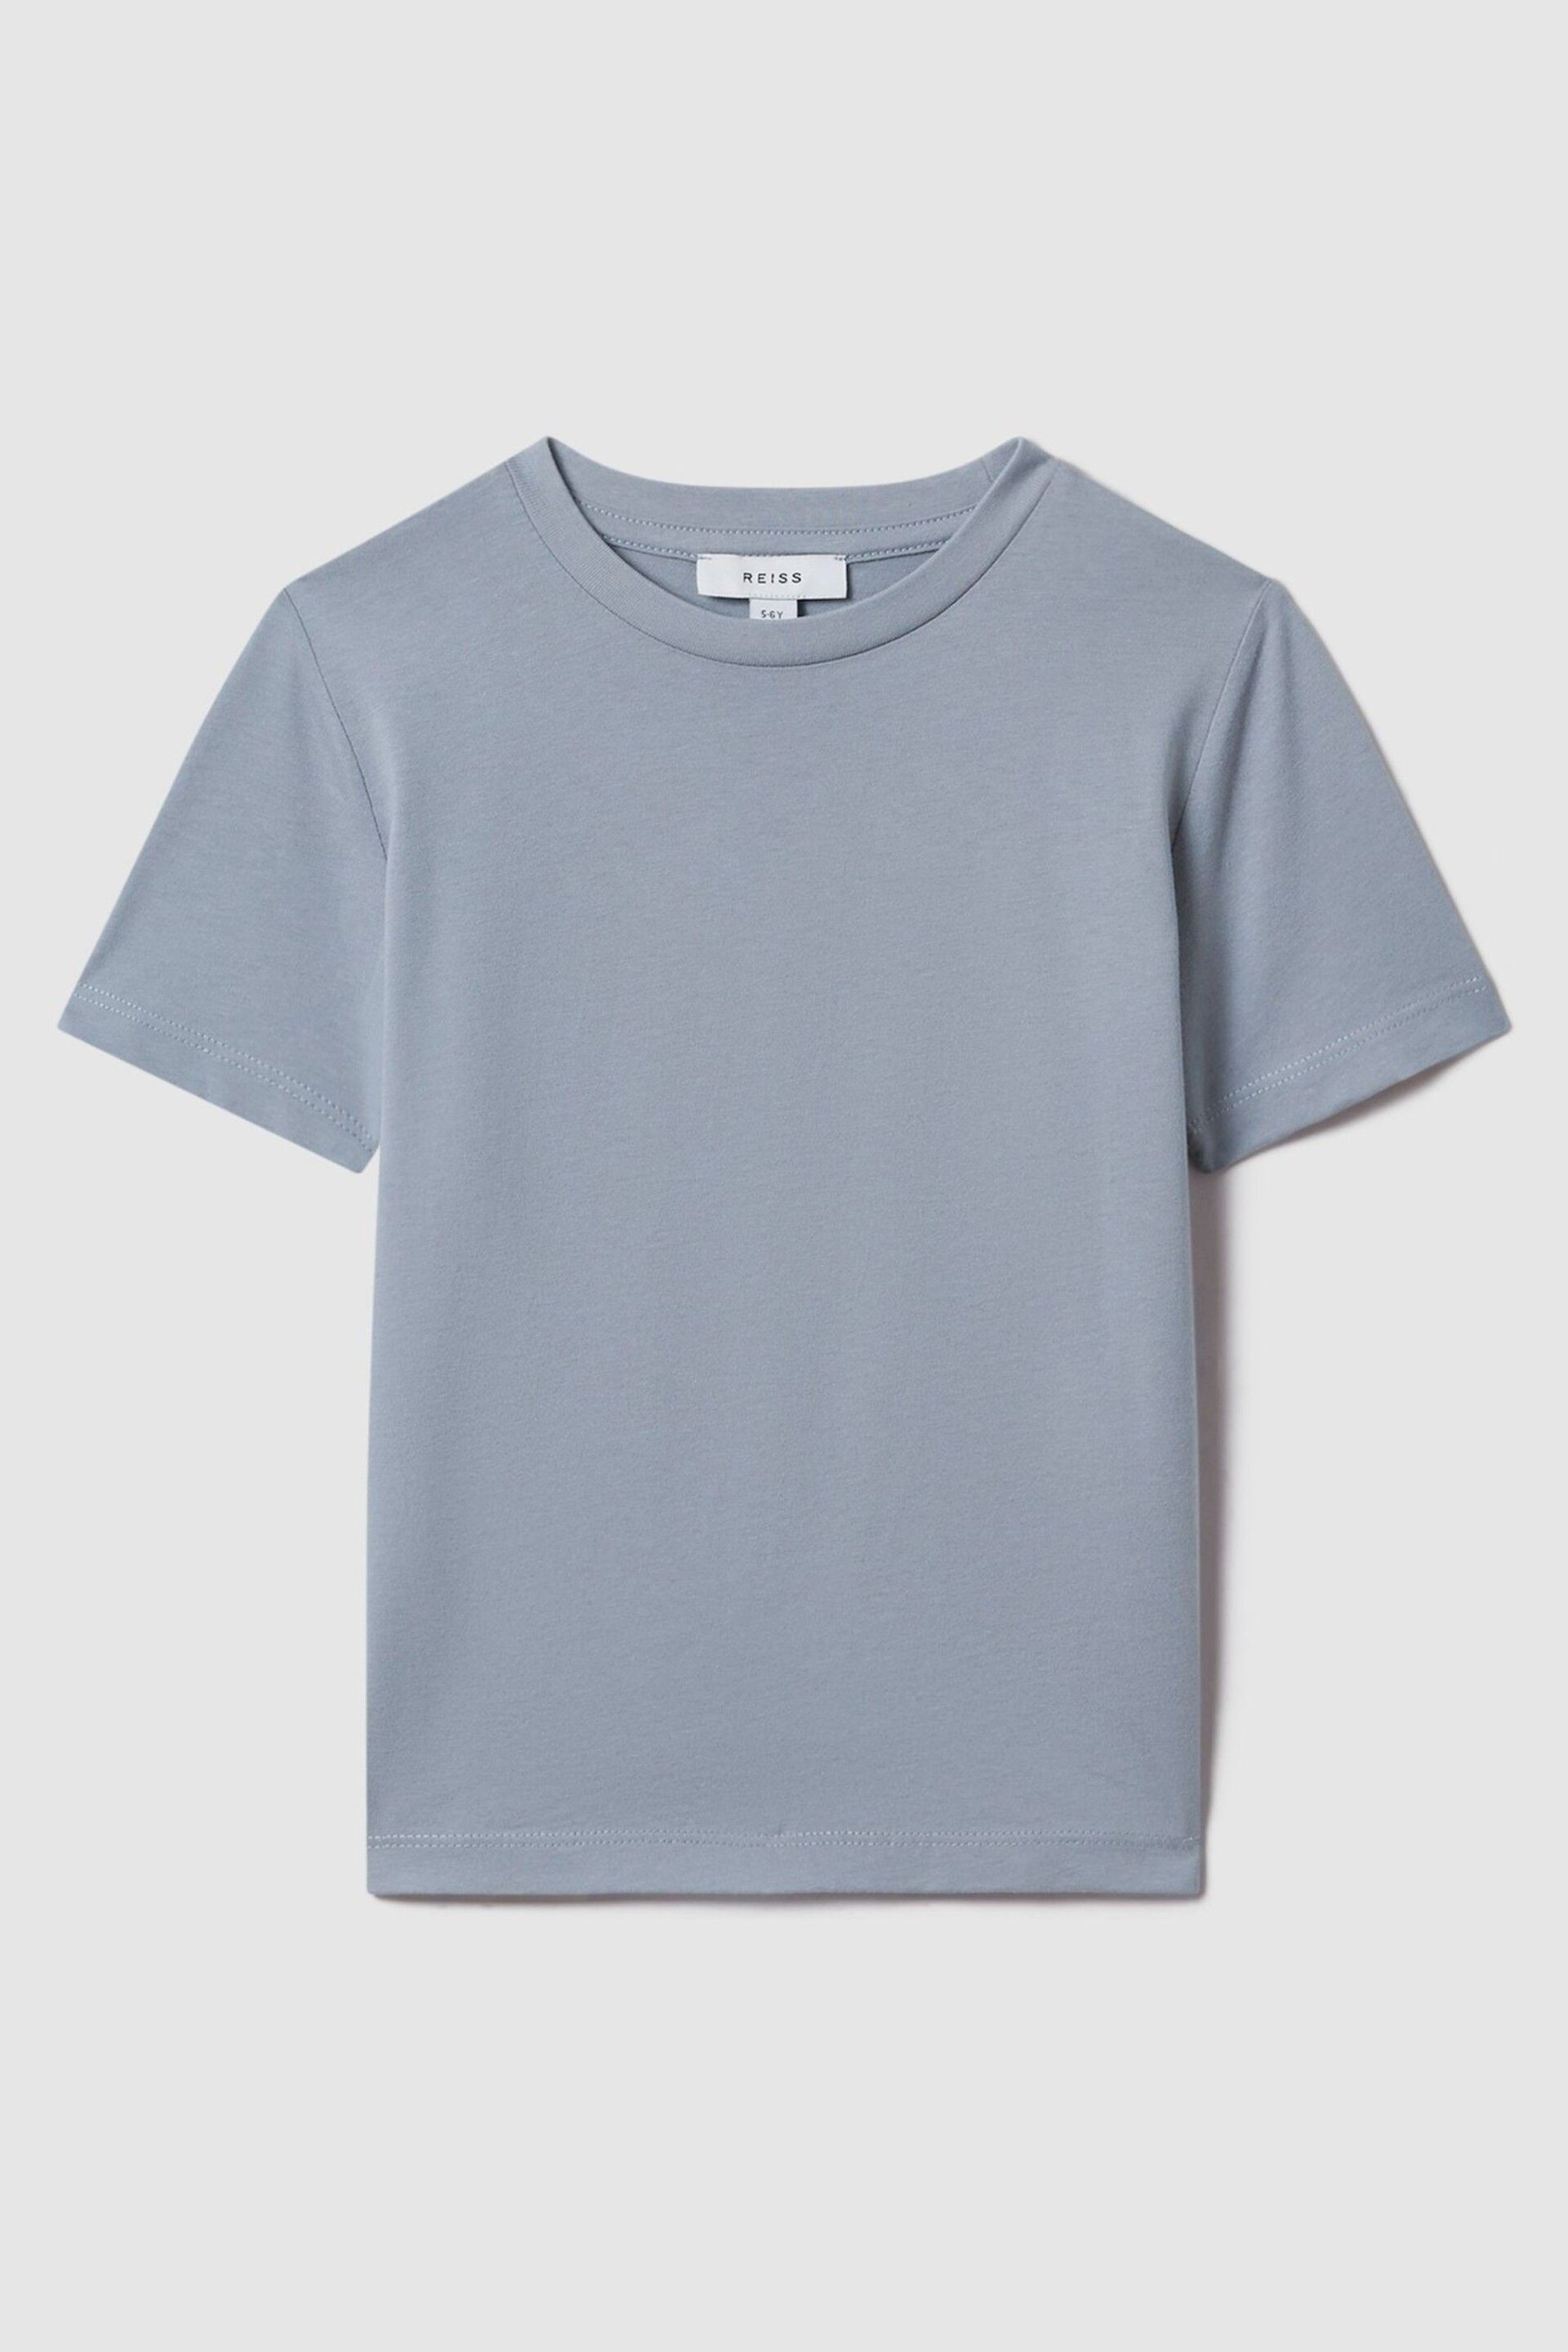 Reiss China Blue Bless Teen Crew Neck T-Shirt - Image 1 of 2